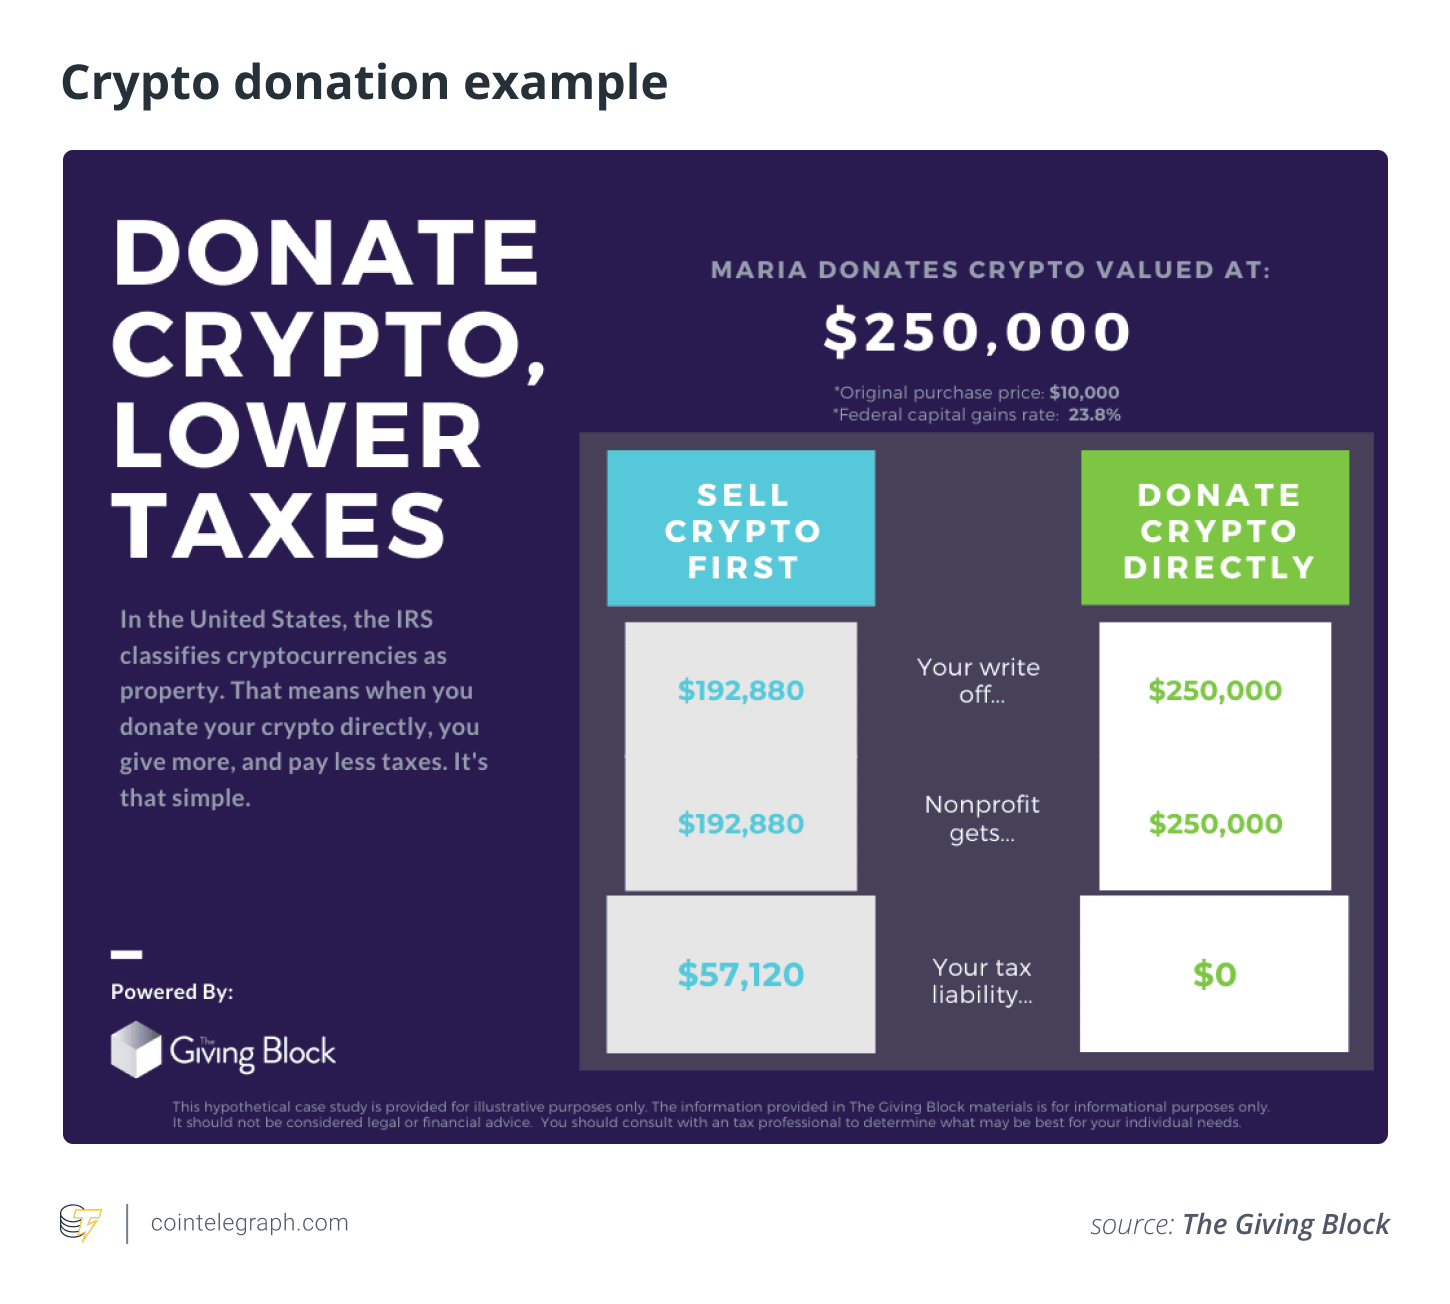 Your Crypto Taxes Can Be Donated to Charity Instead